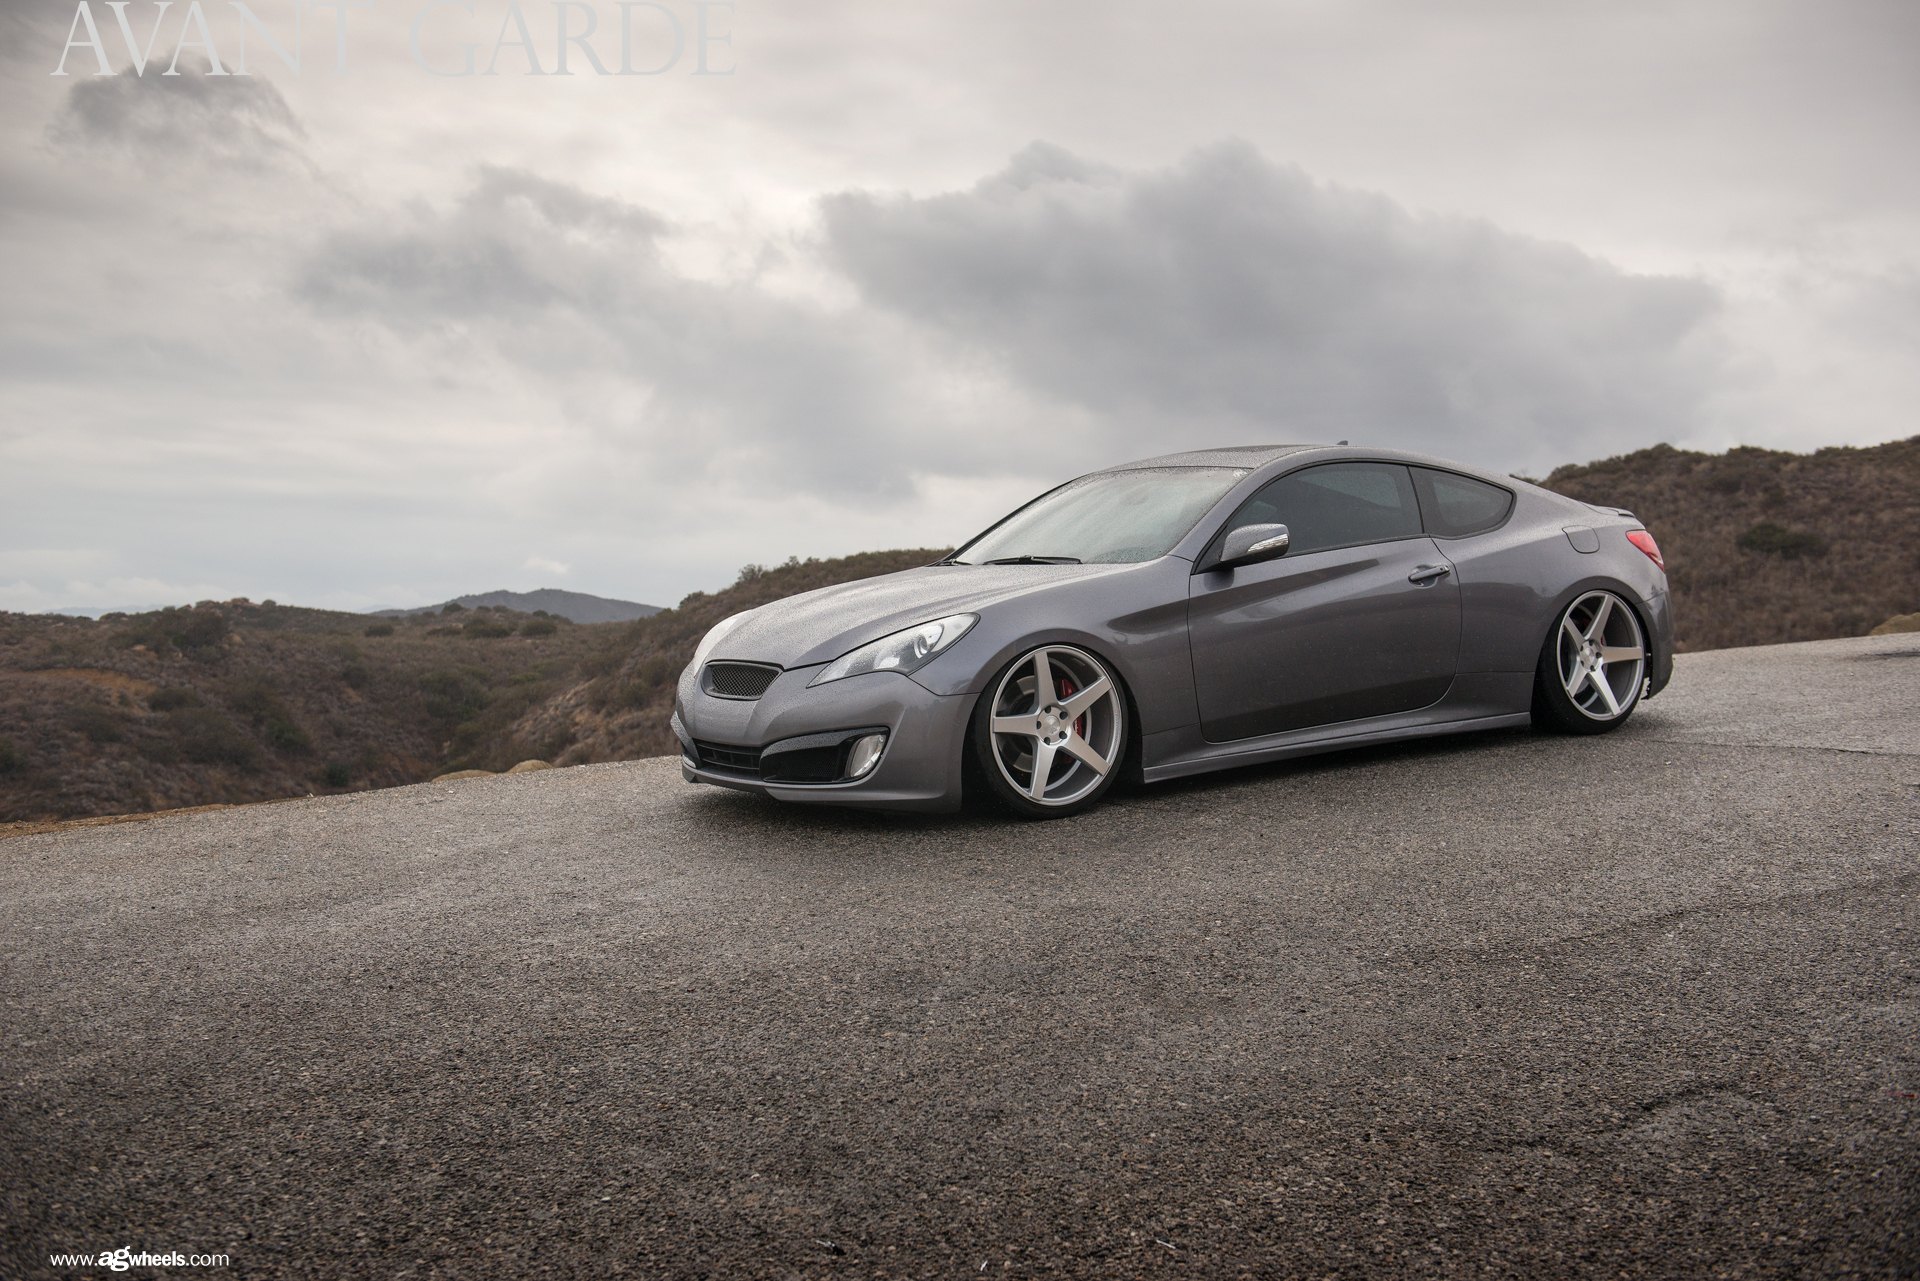 Gray Hyundai Genesis Coupe with Aftermarket Headlights - Photo by Avant Garde Wheels